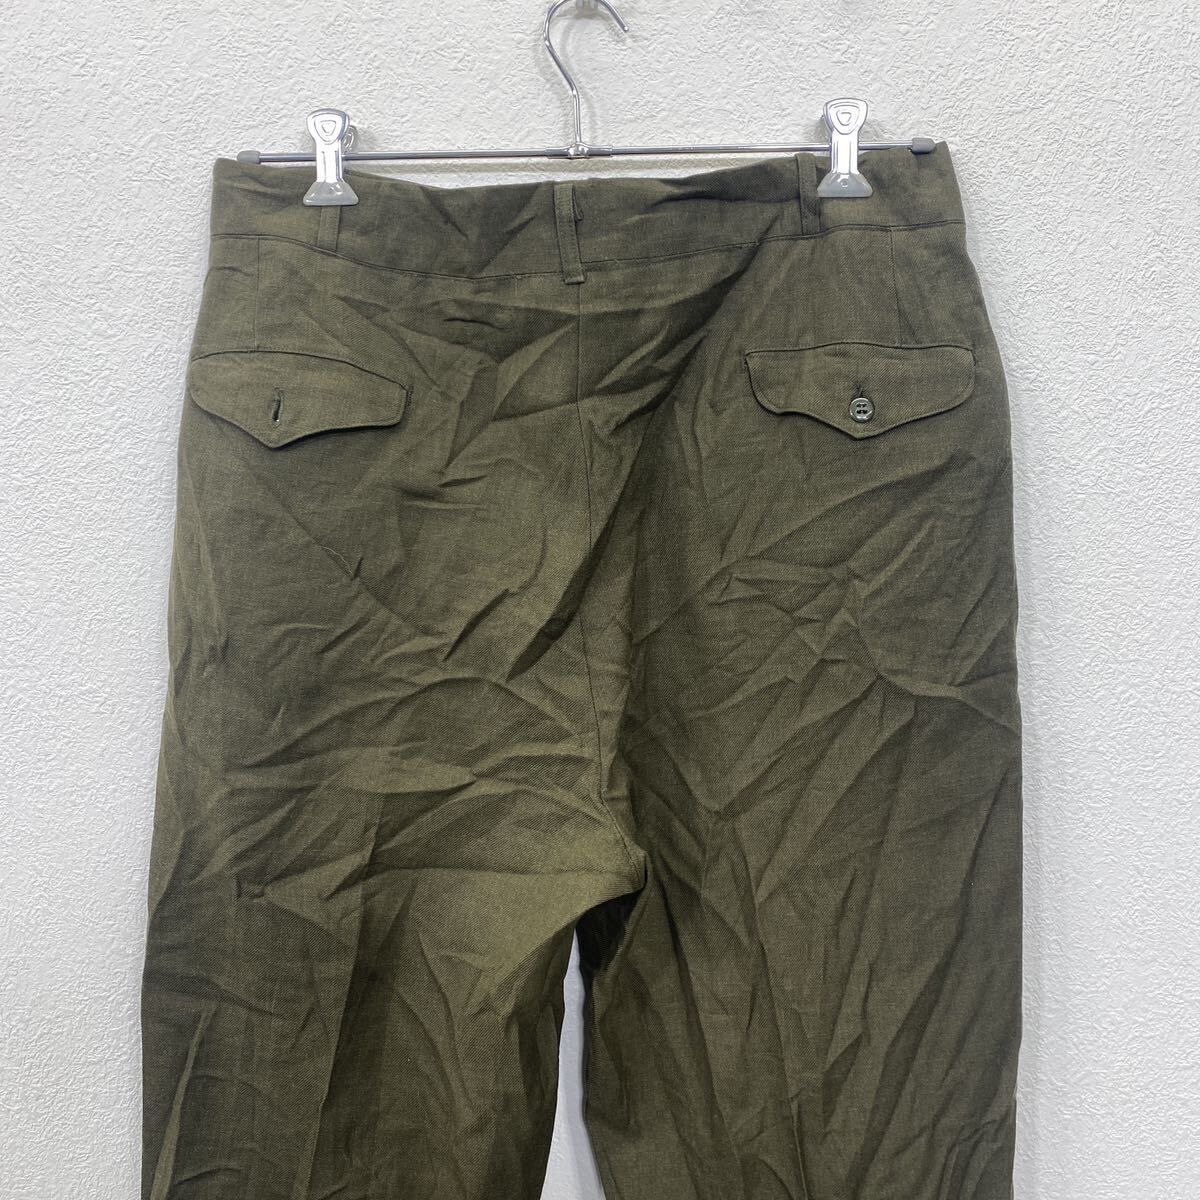  military trousers pants W33 wool RAPID zipper old clothes . America buying up 2403-1179